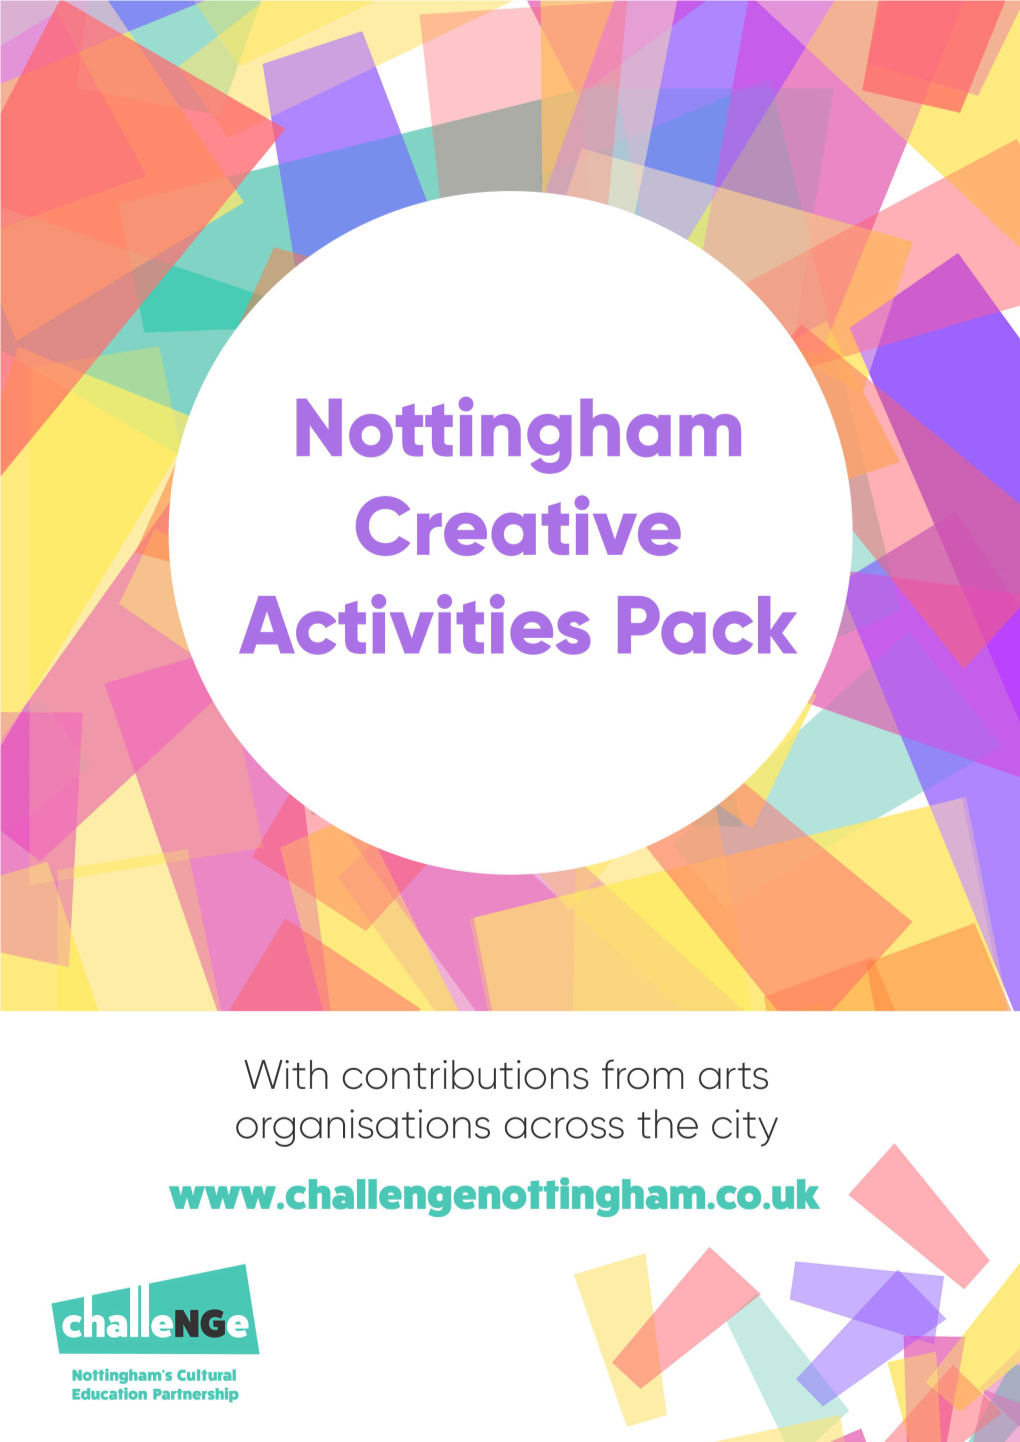 Challenge Activity Pack, Bringing Together Creative Activities from Arts Organisations in Nottingham